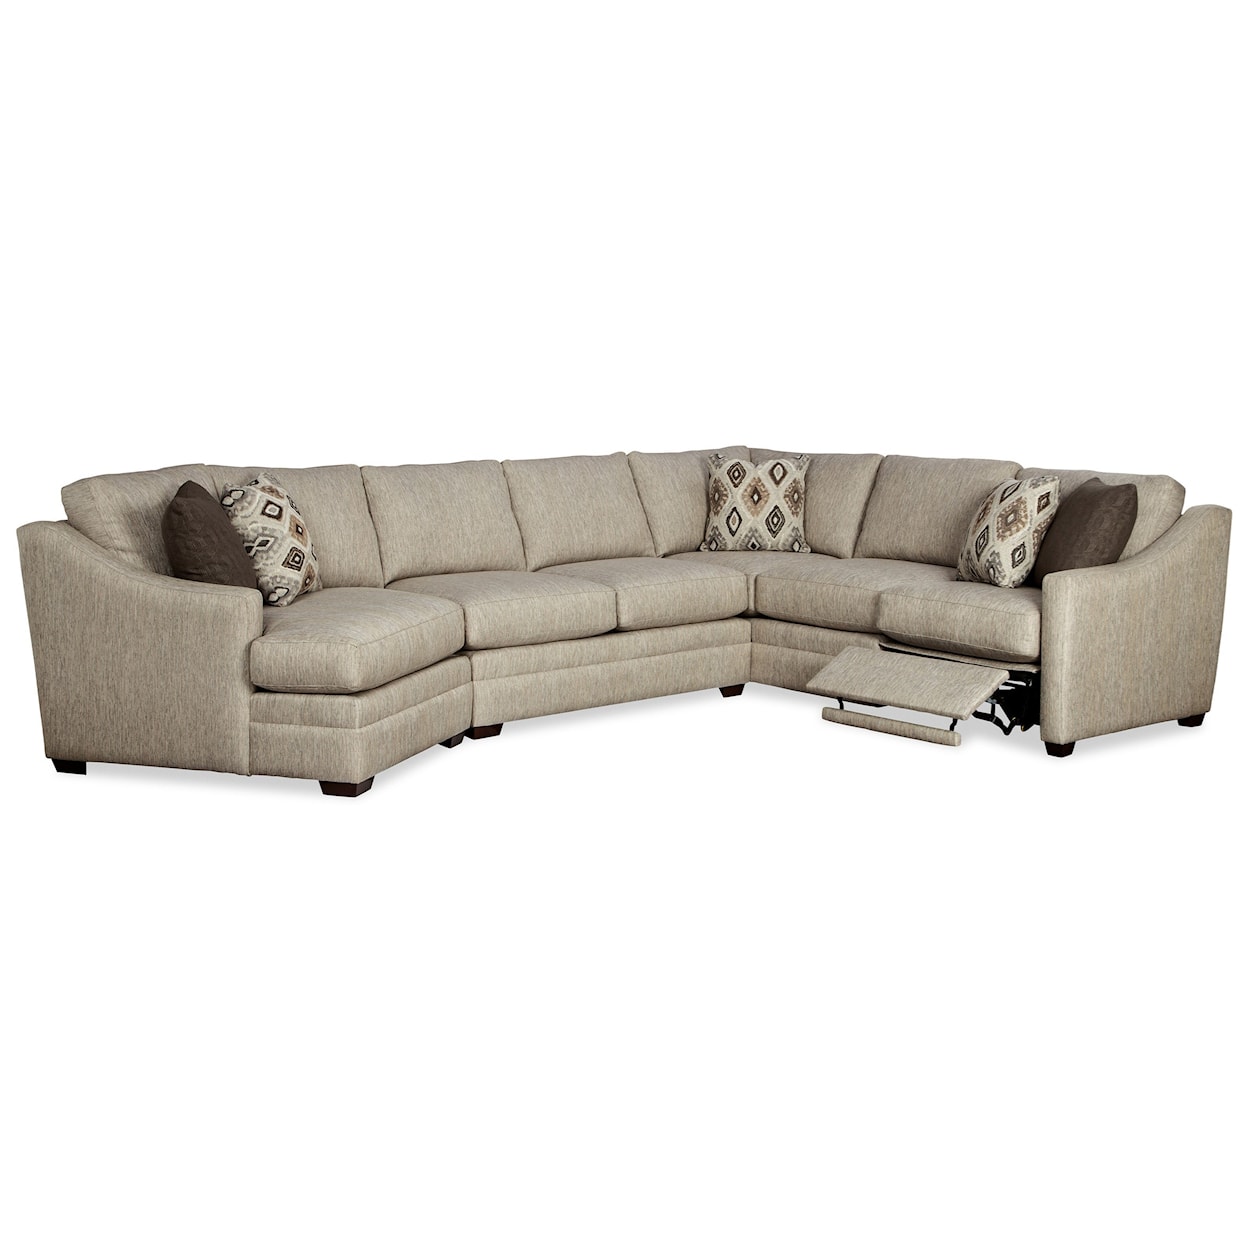 Craftmaster F9 Series 3 Pc Sectional Sofa w/ RAF Recliner